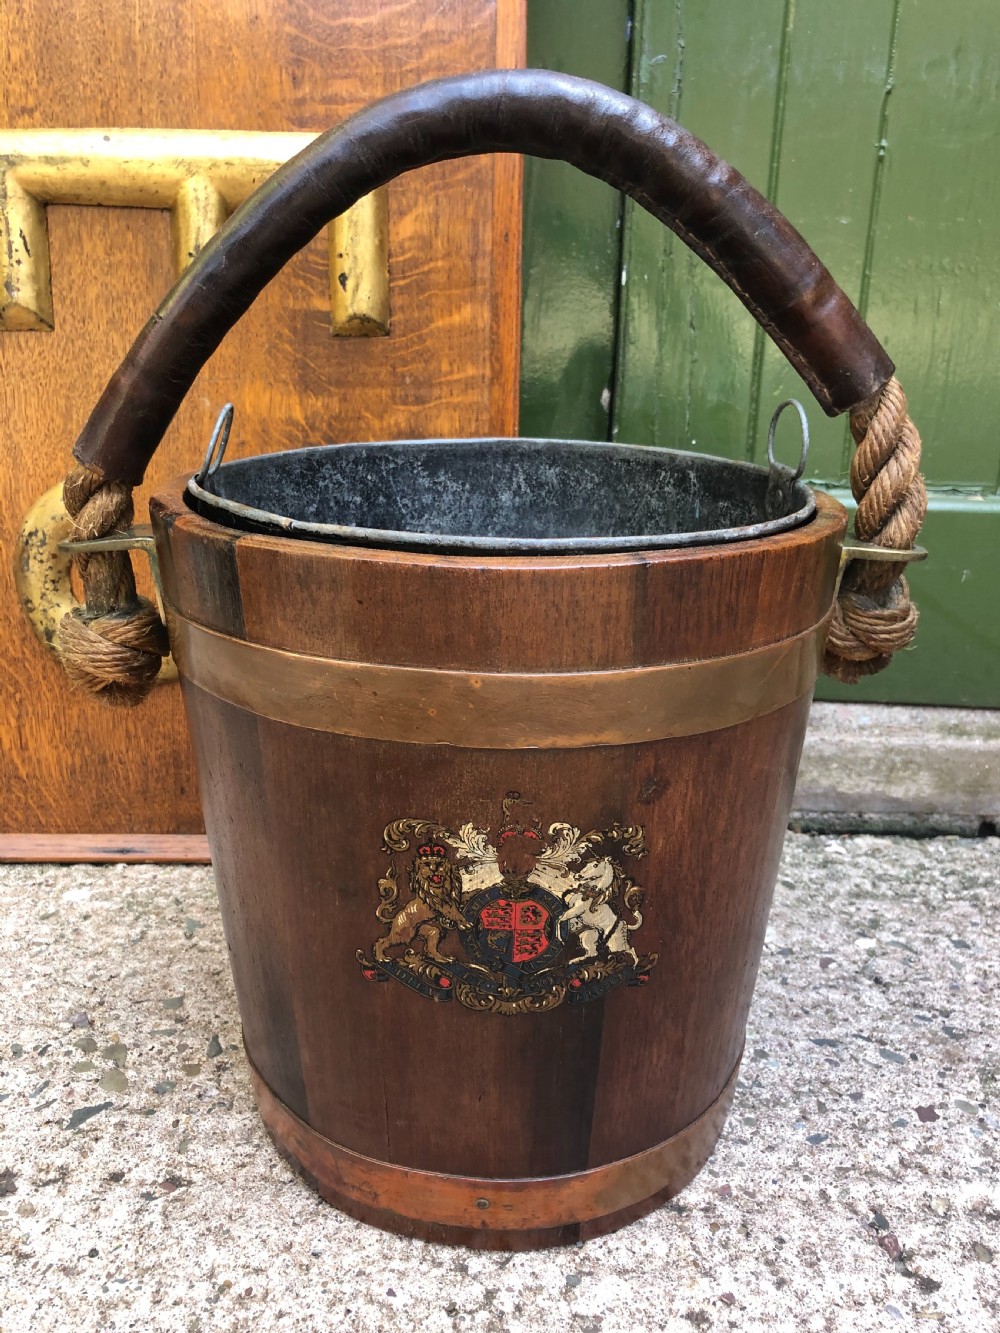 c19th naval teak firebucket with armorial crest leathercovered rope handle and copper ring banding